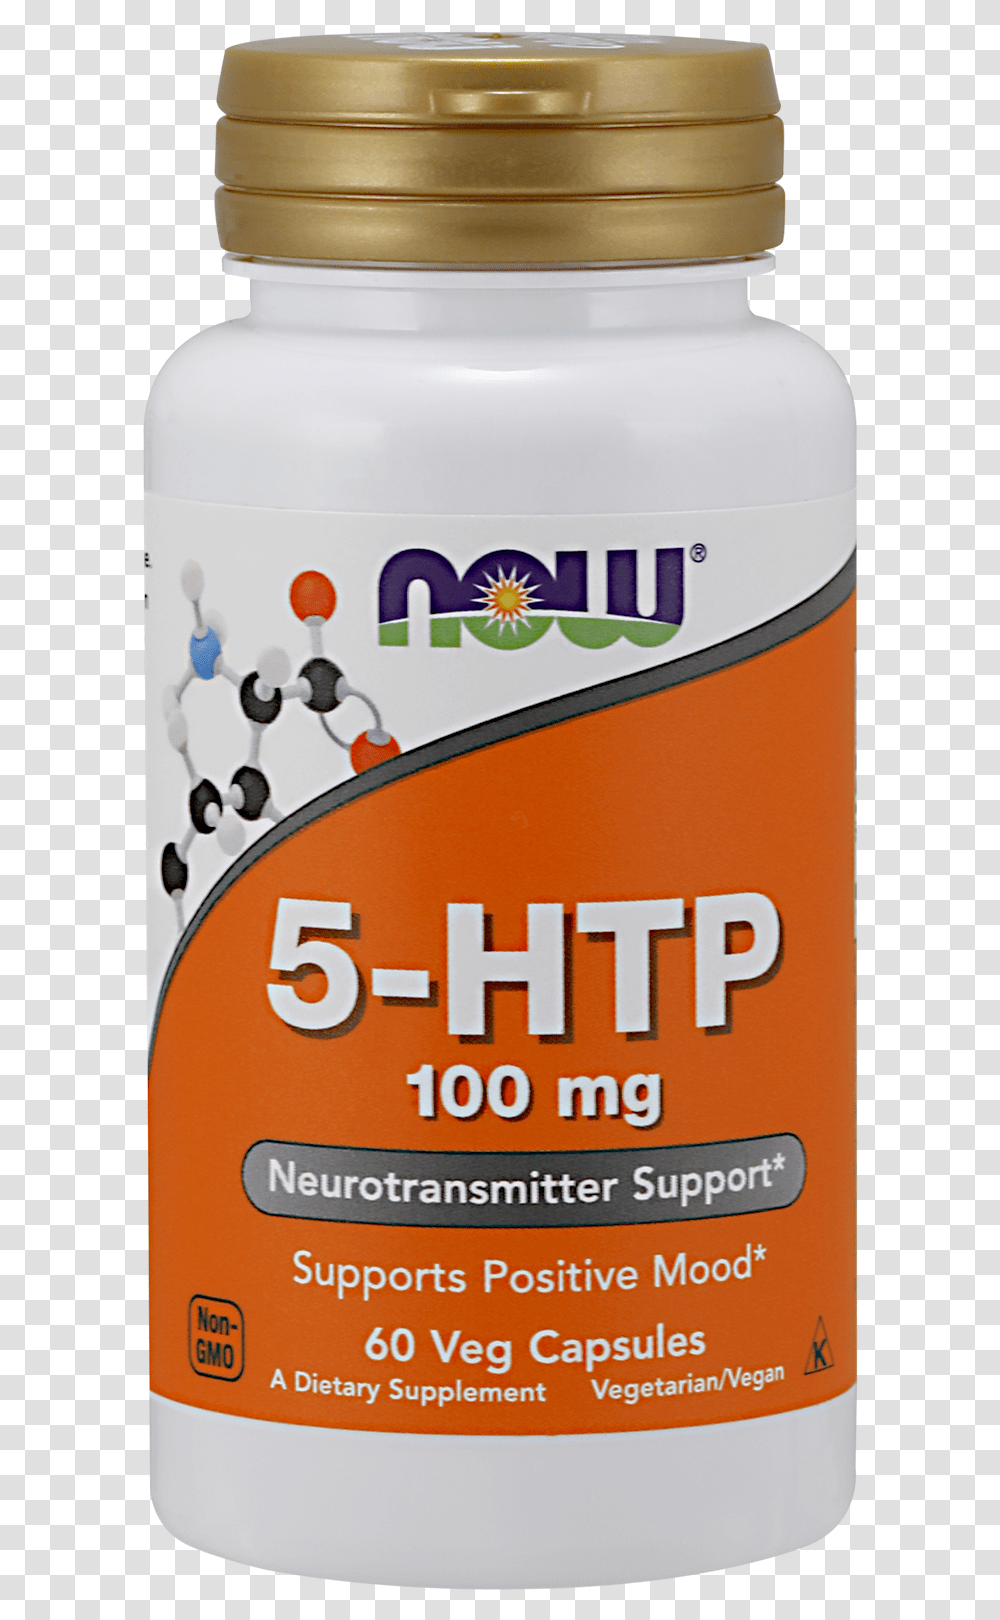 Htp 100 Mg Now 5 Htp, Cosmetics, Bottle, Beer, Alcohol Transparent Png